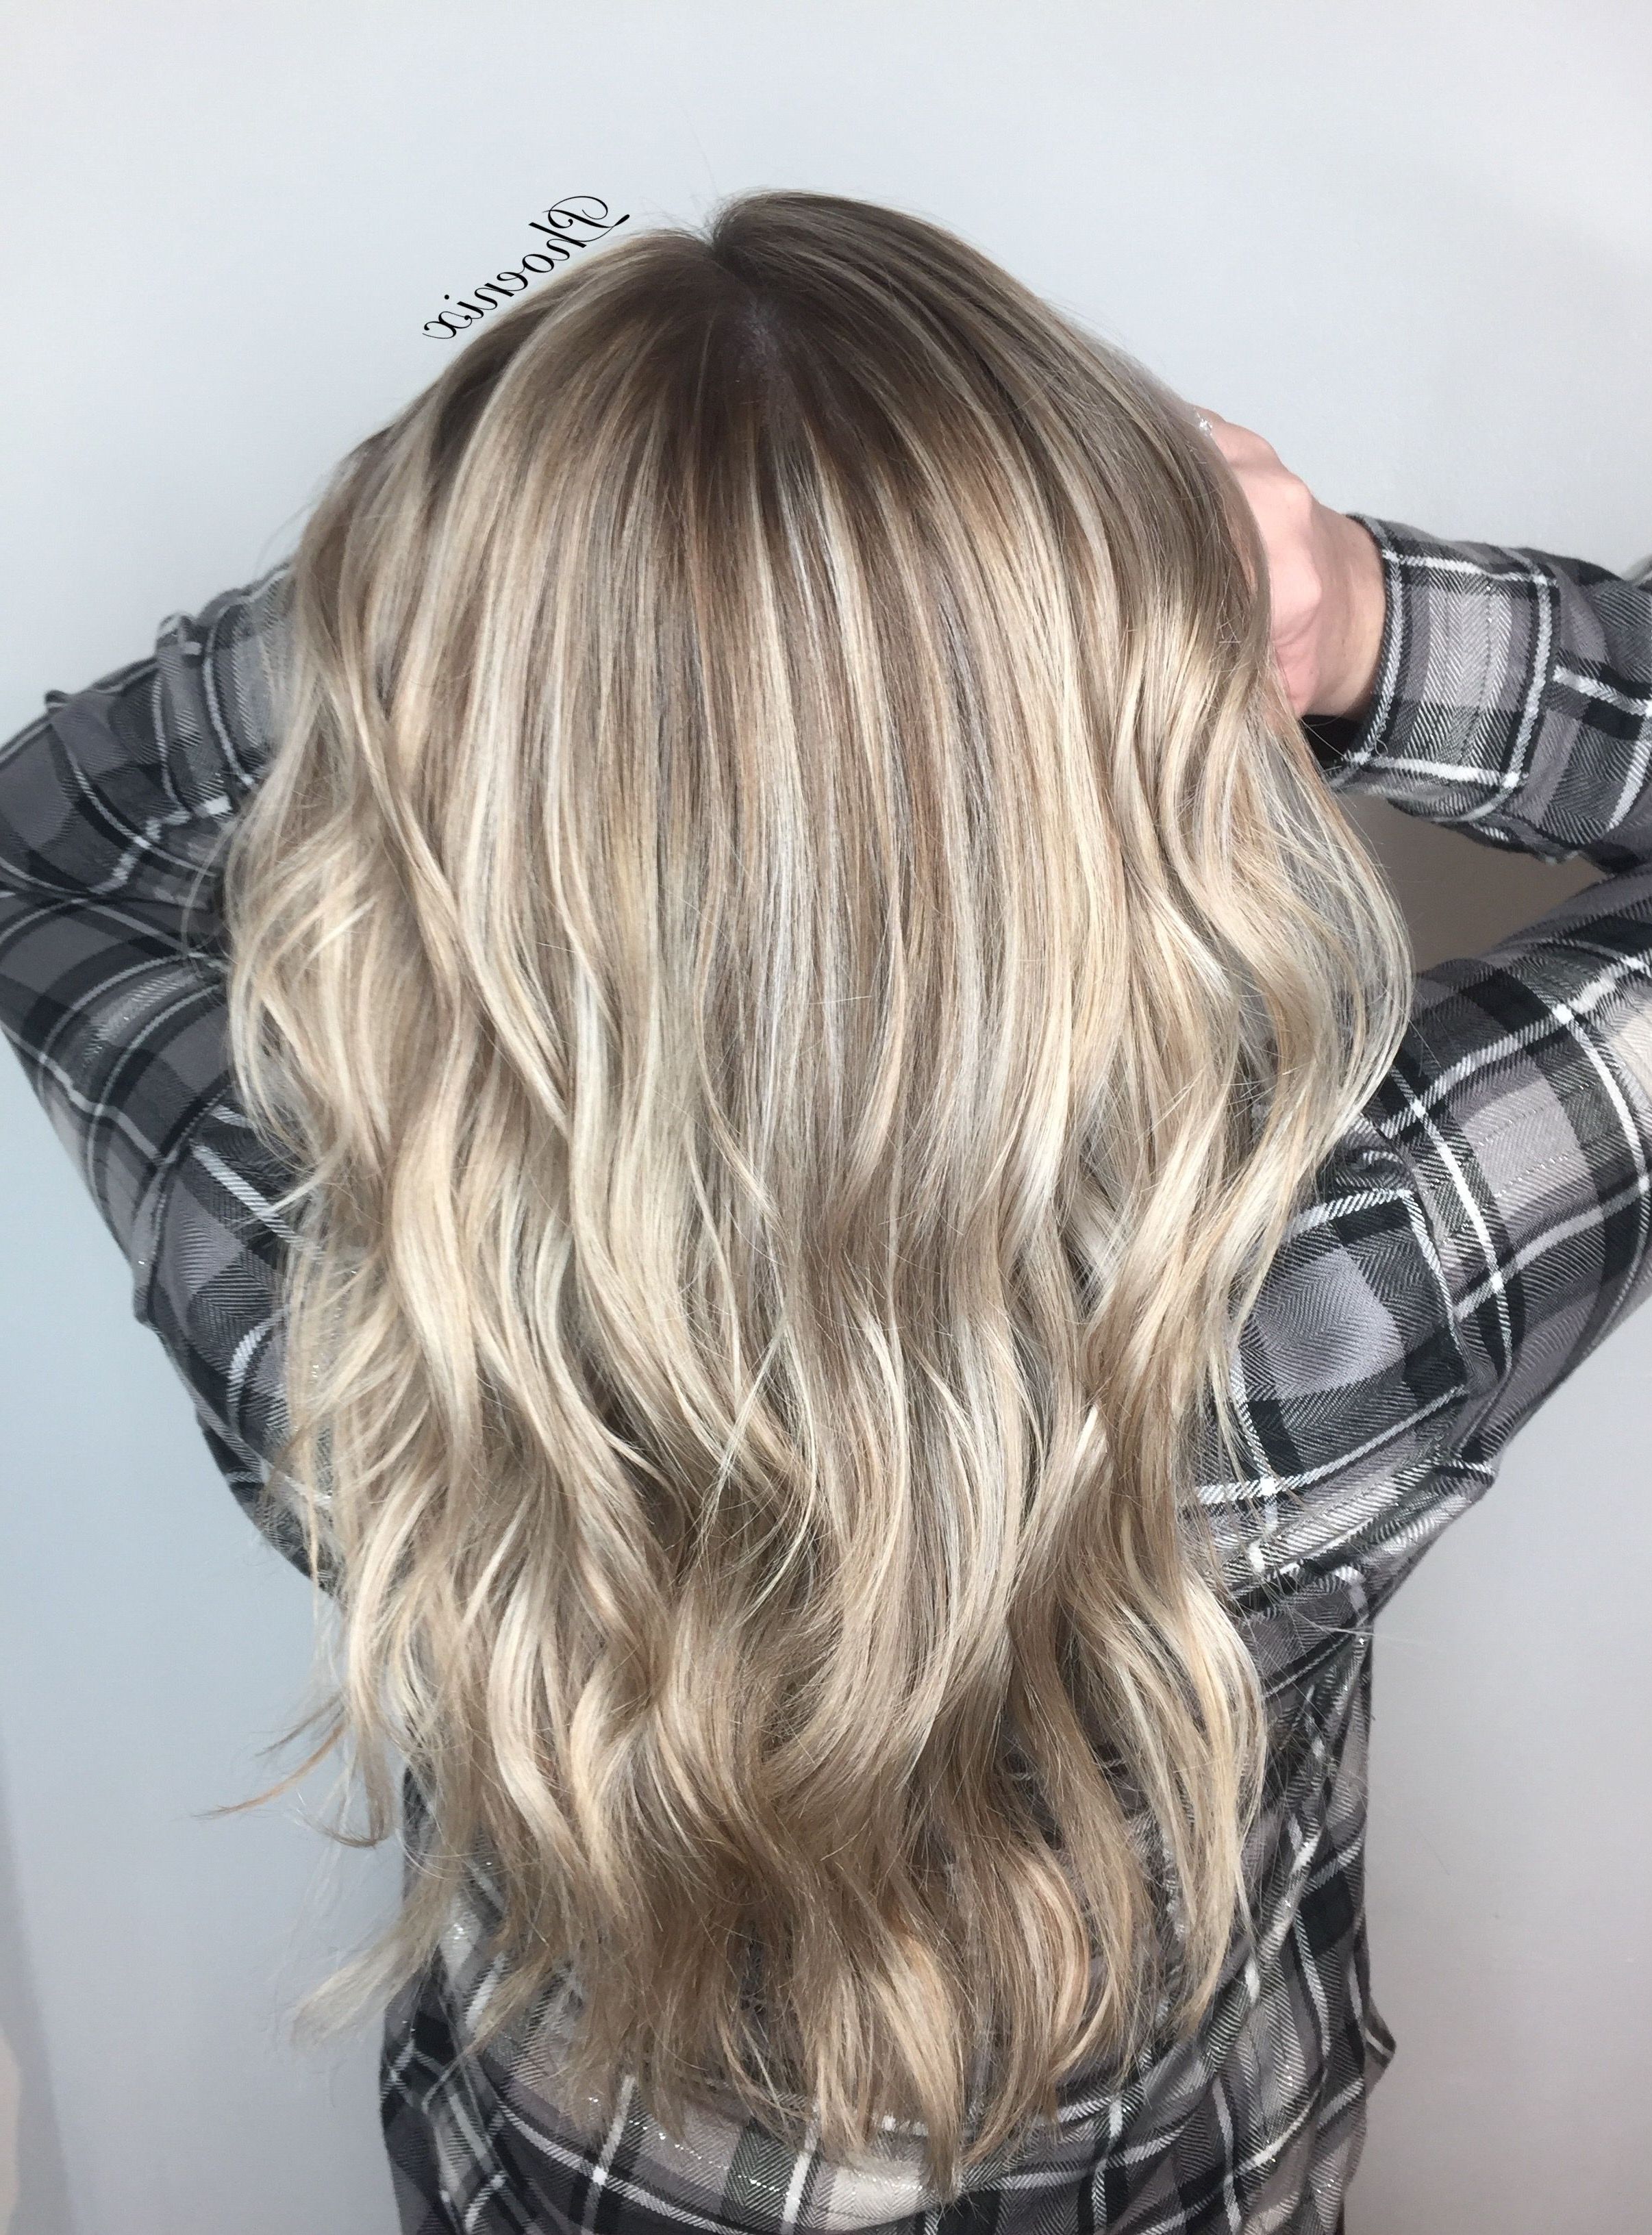 Well Liked Feathered Ash Blonde Hairstyles In Blonde Hair Ice Blonde Hair Ash Blonde Hair Balayage Hair (Gallery 1 of 20)